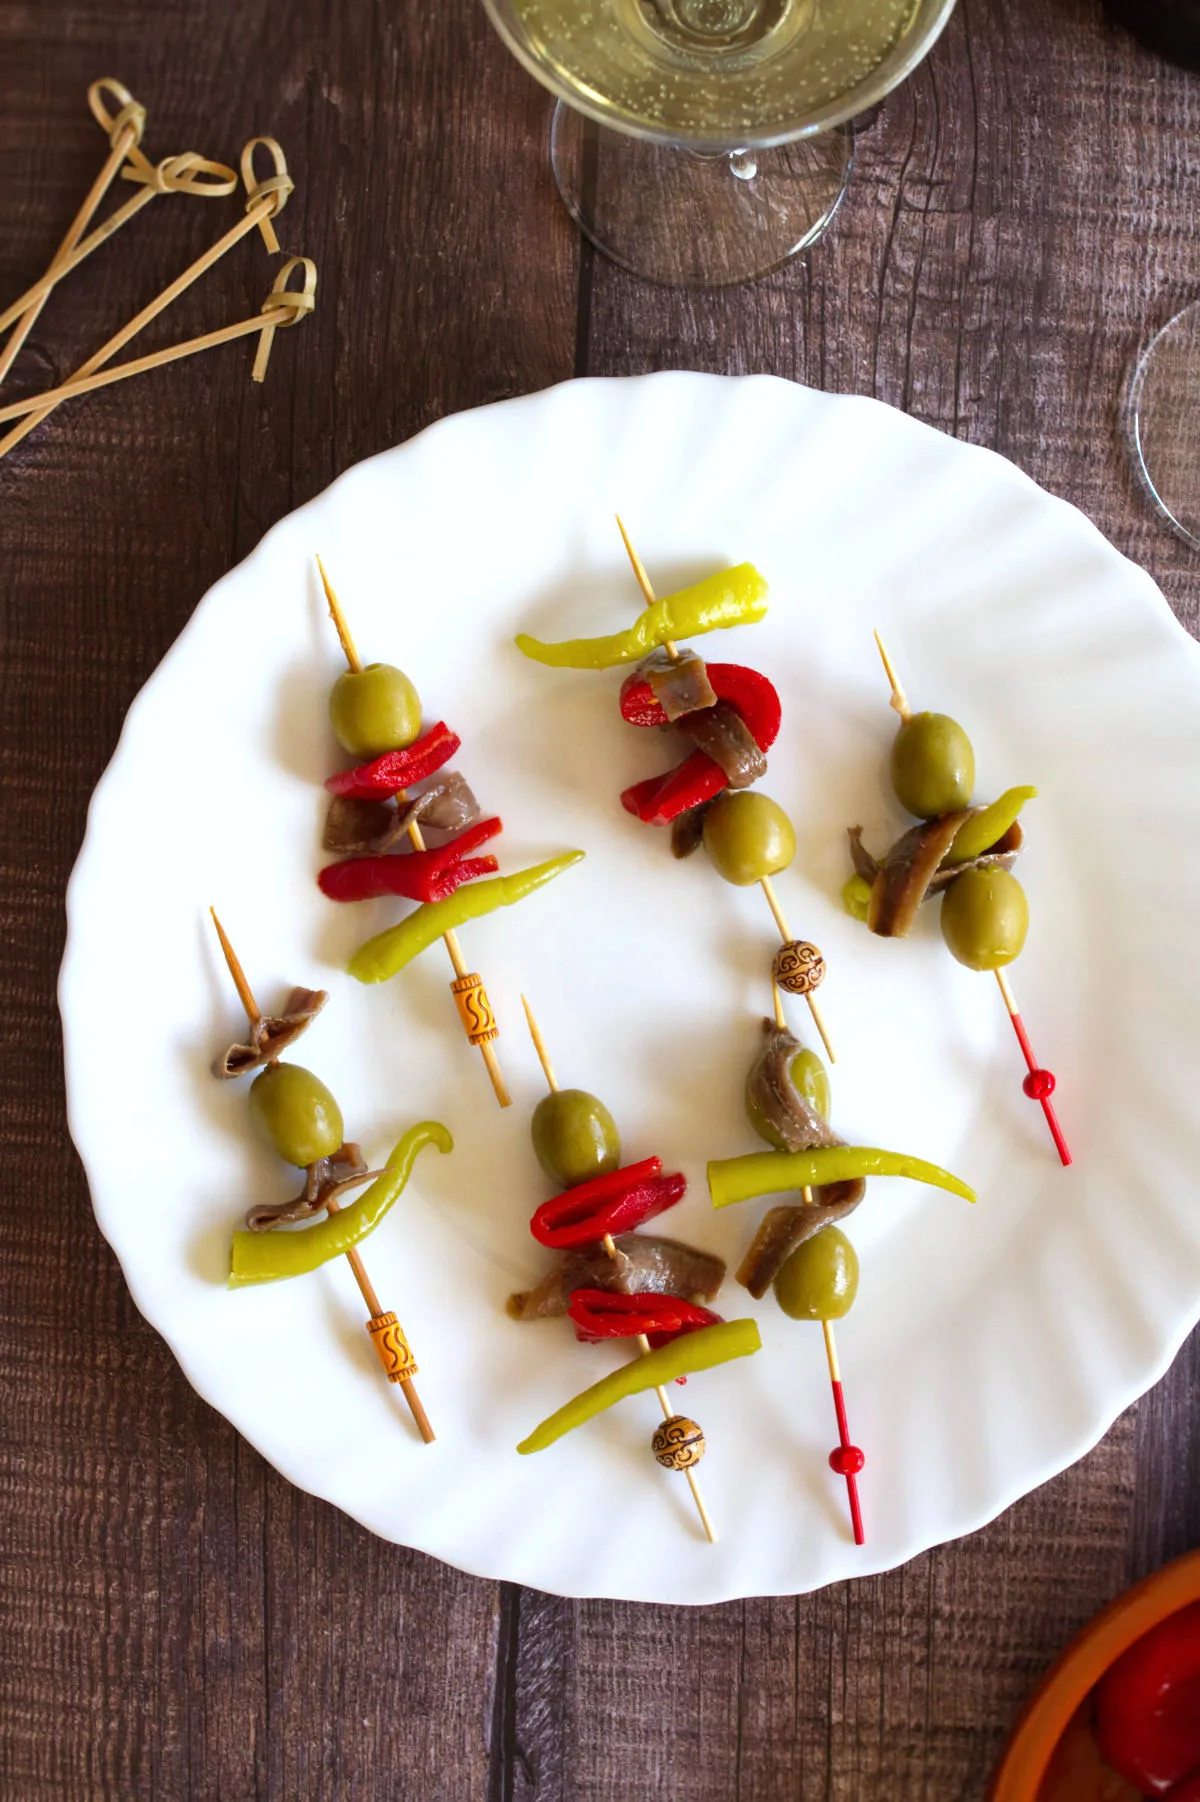 A selection of banderillas on a plate — ingredients like roasted peppers and olives on a toothpick as a snack or a tapas.